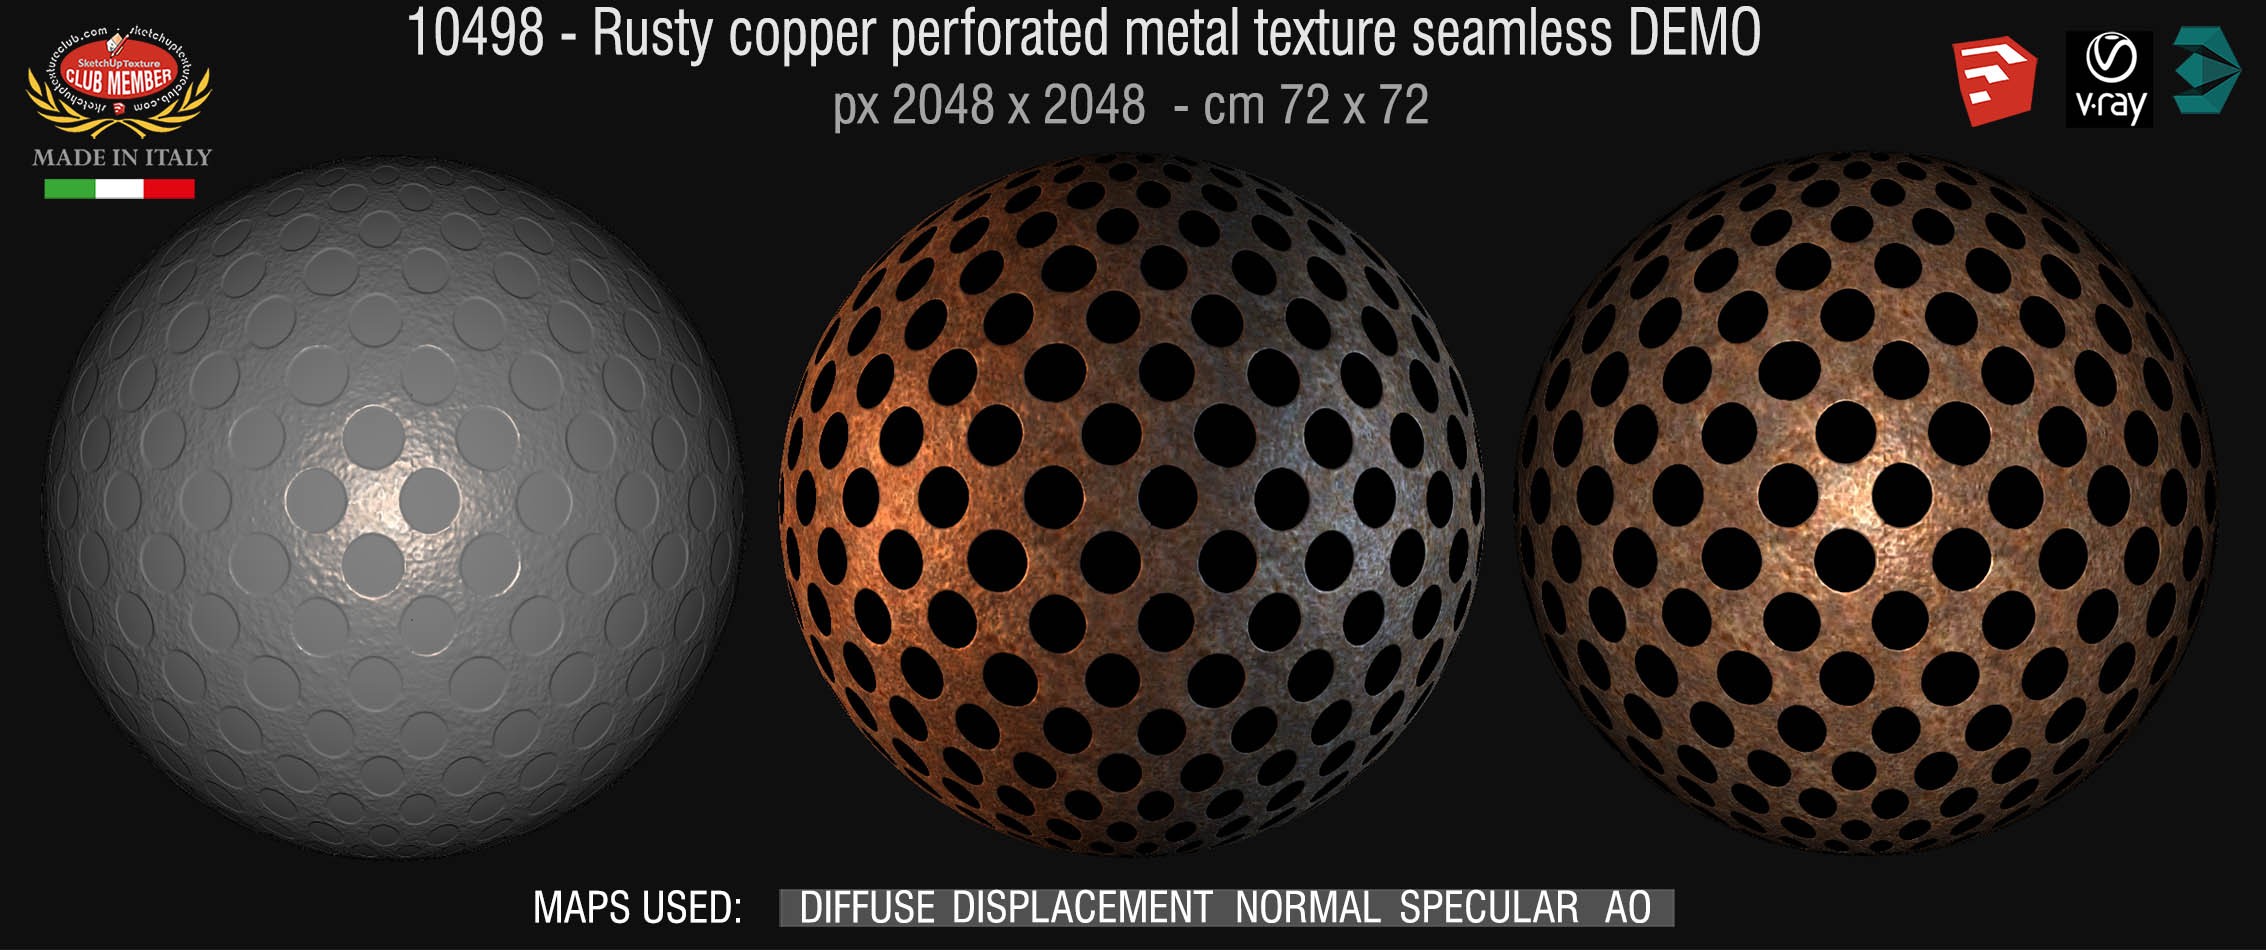 10498 HR Rusty copper perforated metal texture seamless + maps DEMO